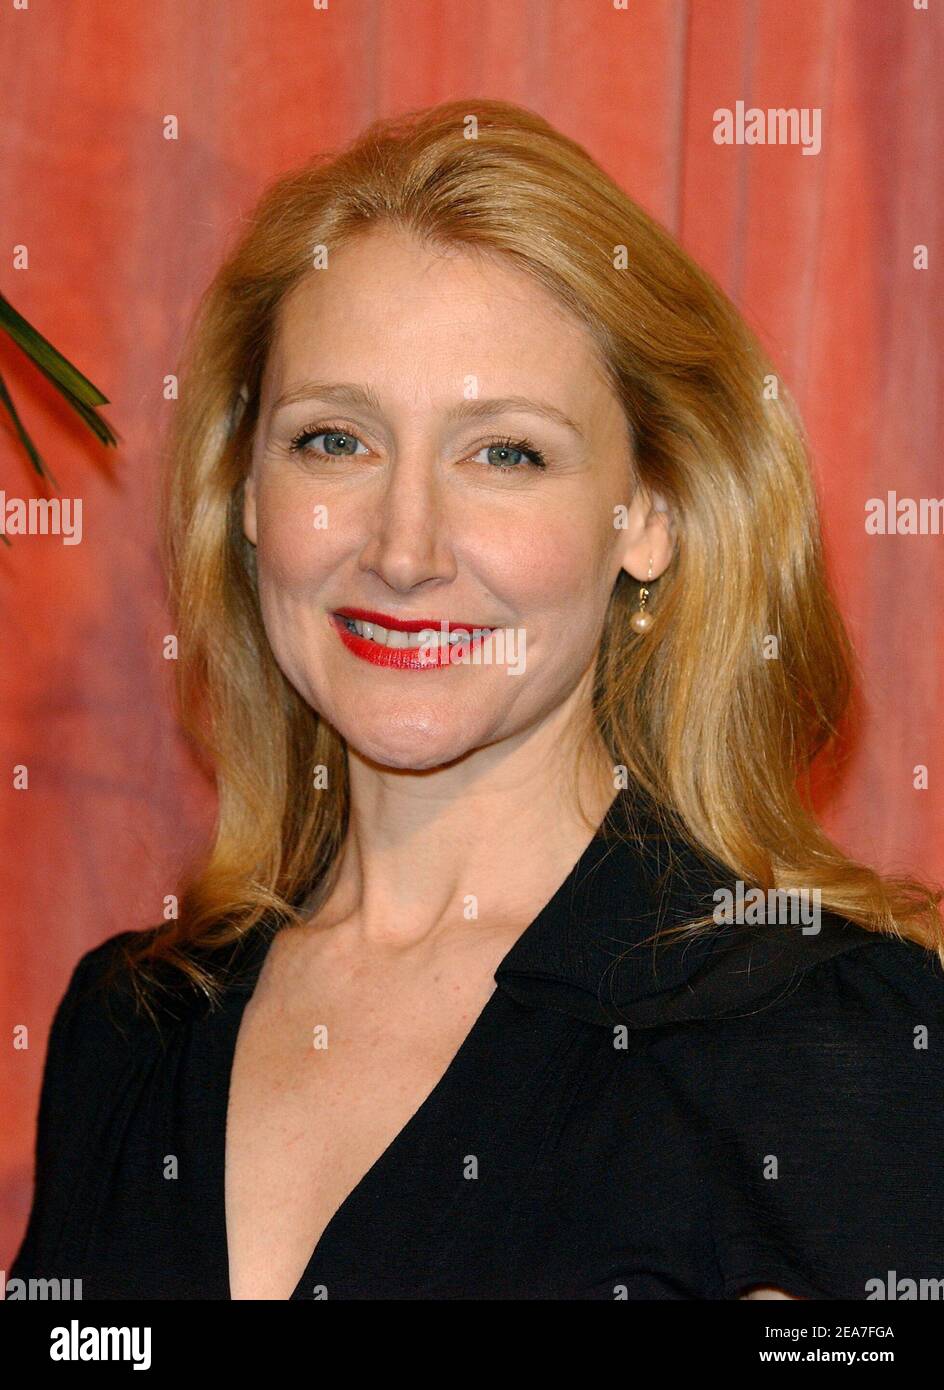 Patricia Clarkson attends the 76th Academy Awards Nominees Luncheon at the Beverly Hilton Hotel. Los Angeles, February 9, 2004. (Pictured: Patricia Clarkson). Photo by Lionel Hahn/Abaca. Stock Photo